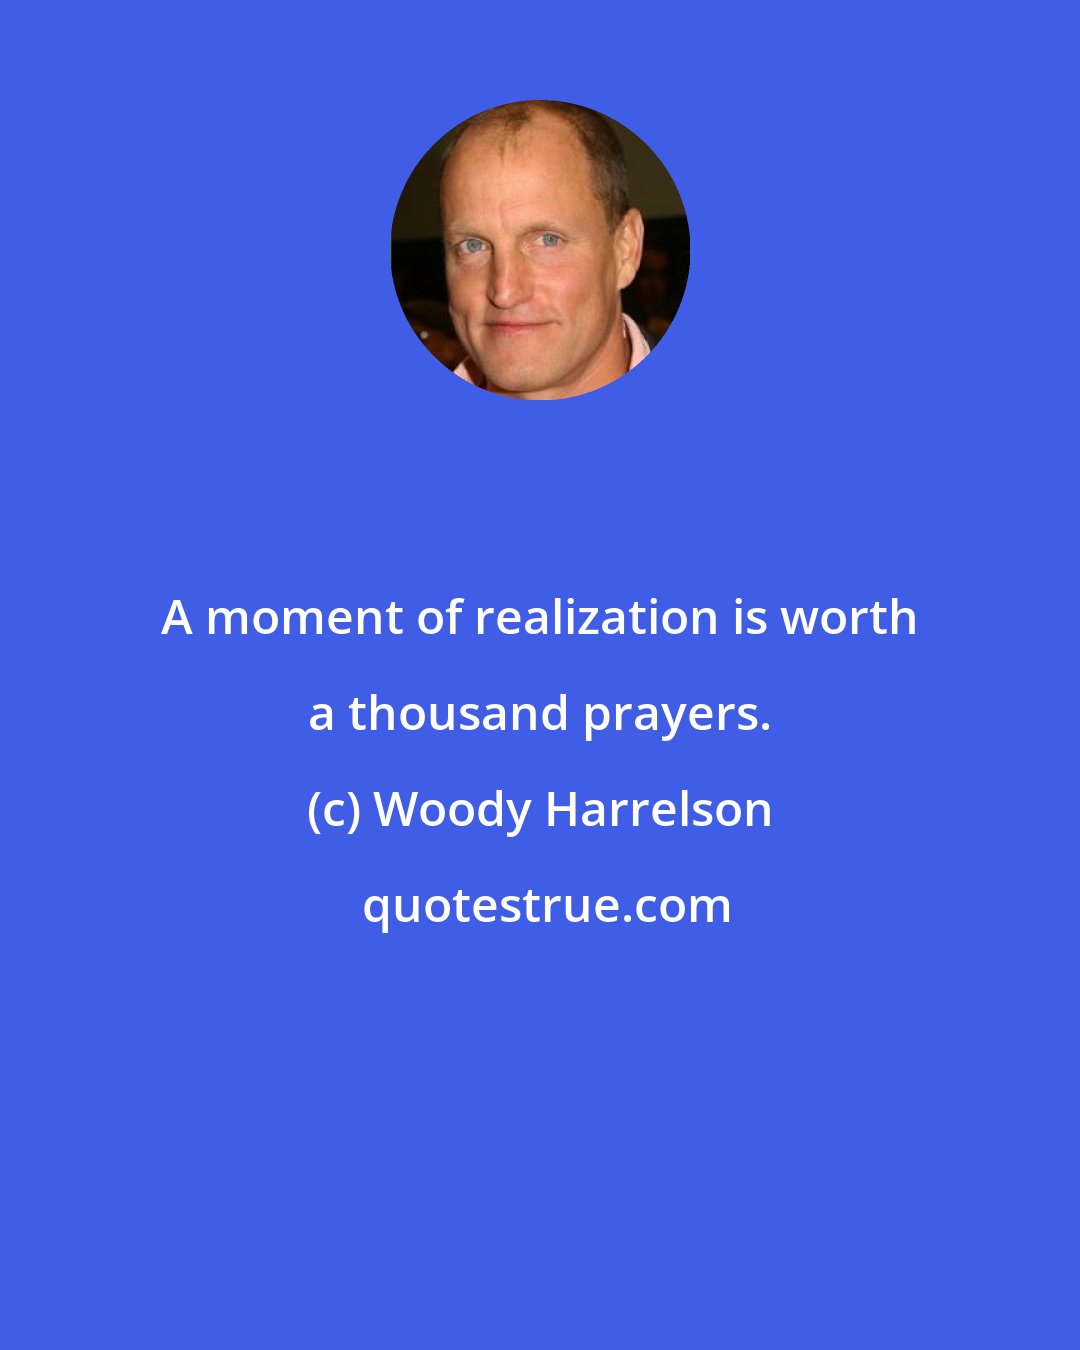 Woody Harrelson: A moment of realization is worth a thousand prayers.